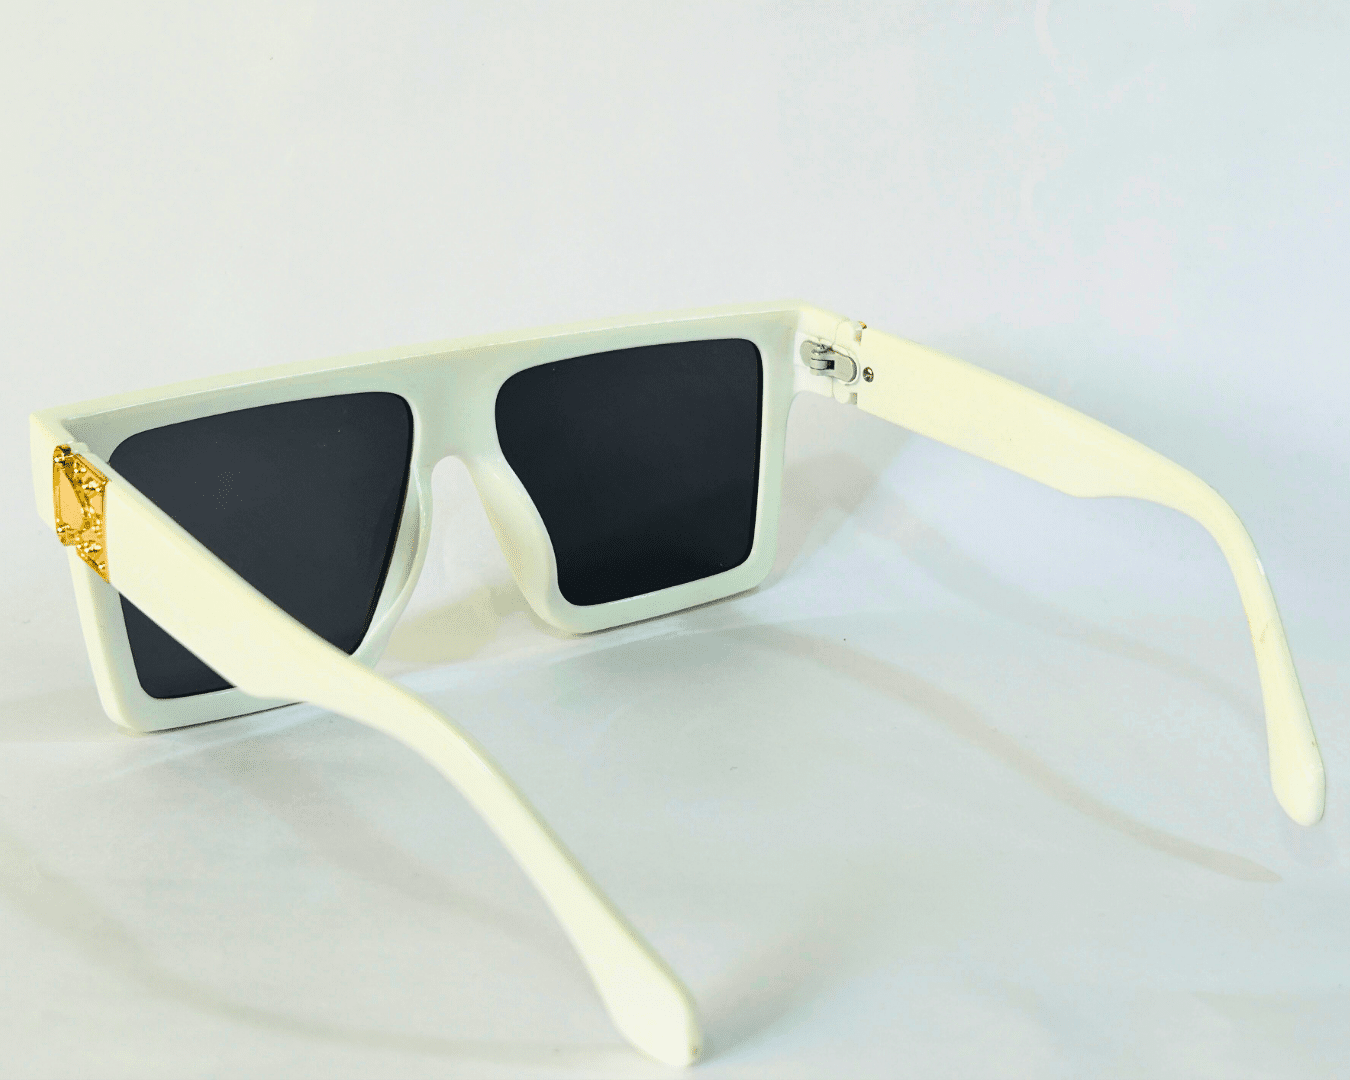 Lookout Shades Black x White